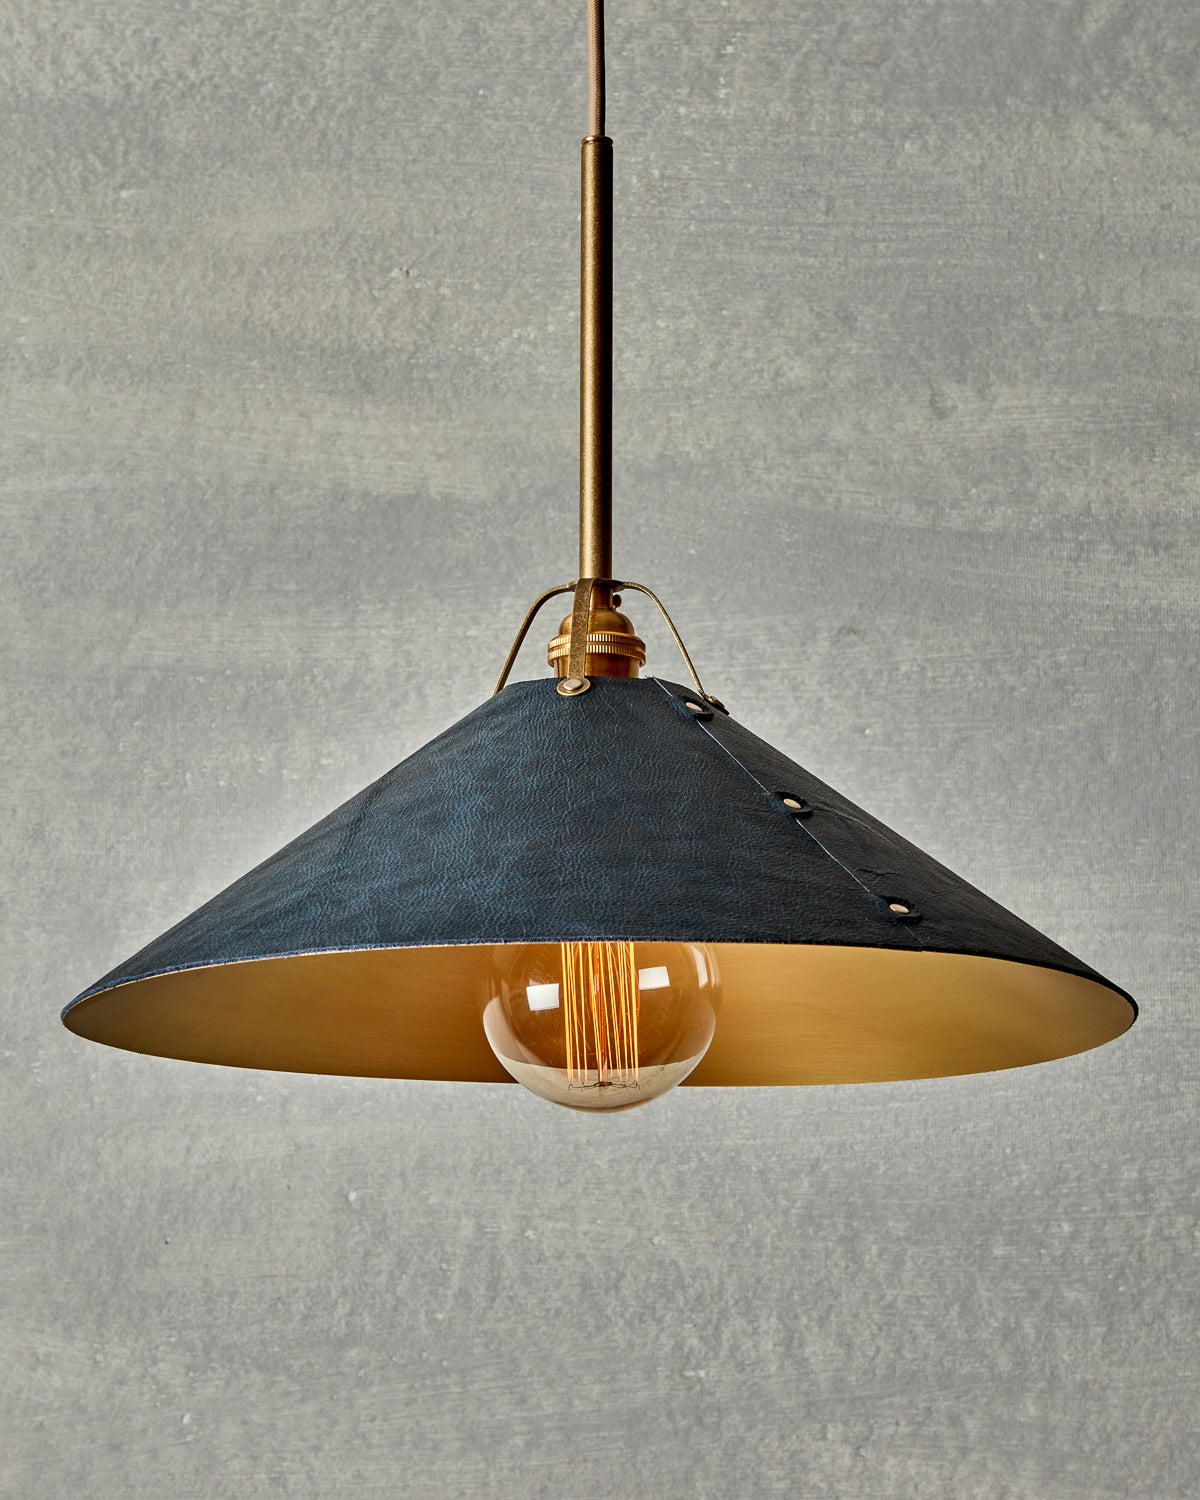 Navy blue leather and satin brass ceiling pendant light. Made by RTO Lighting in Philadelphia. Hardwired light fixture. Simple interior design, made in the USA.